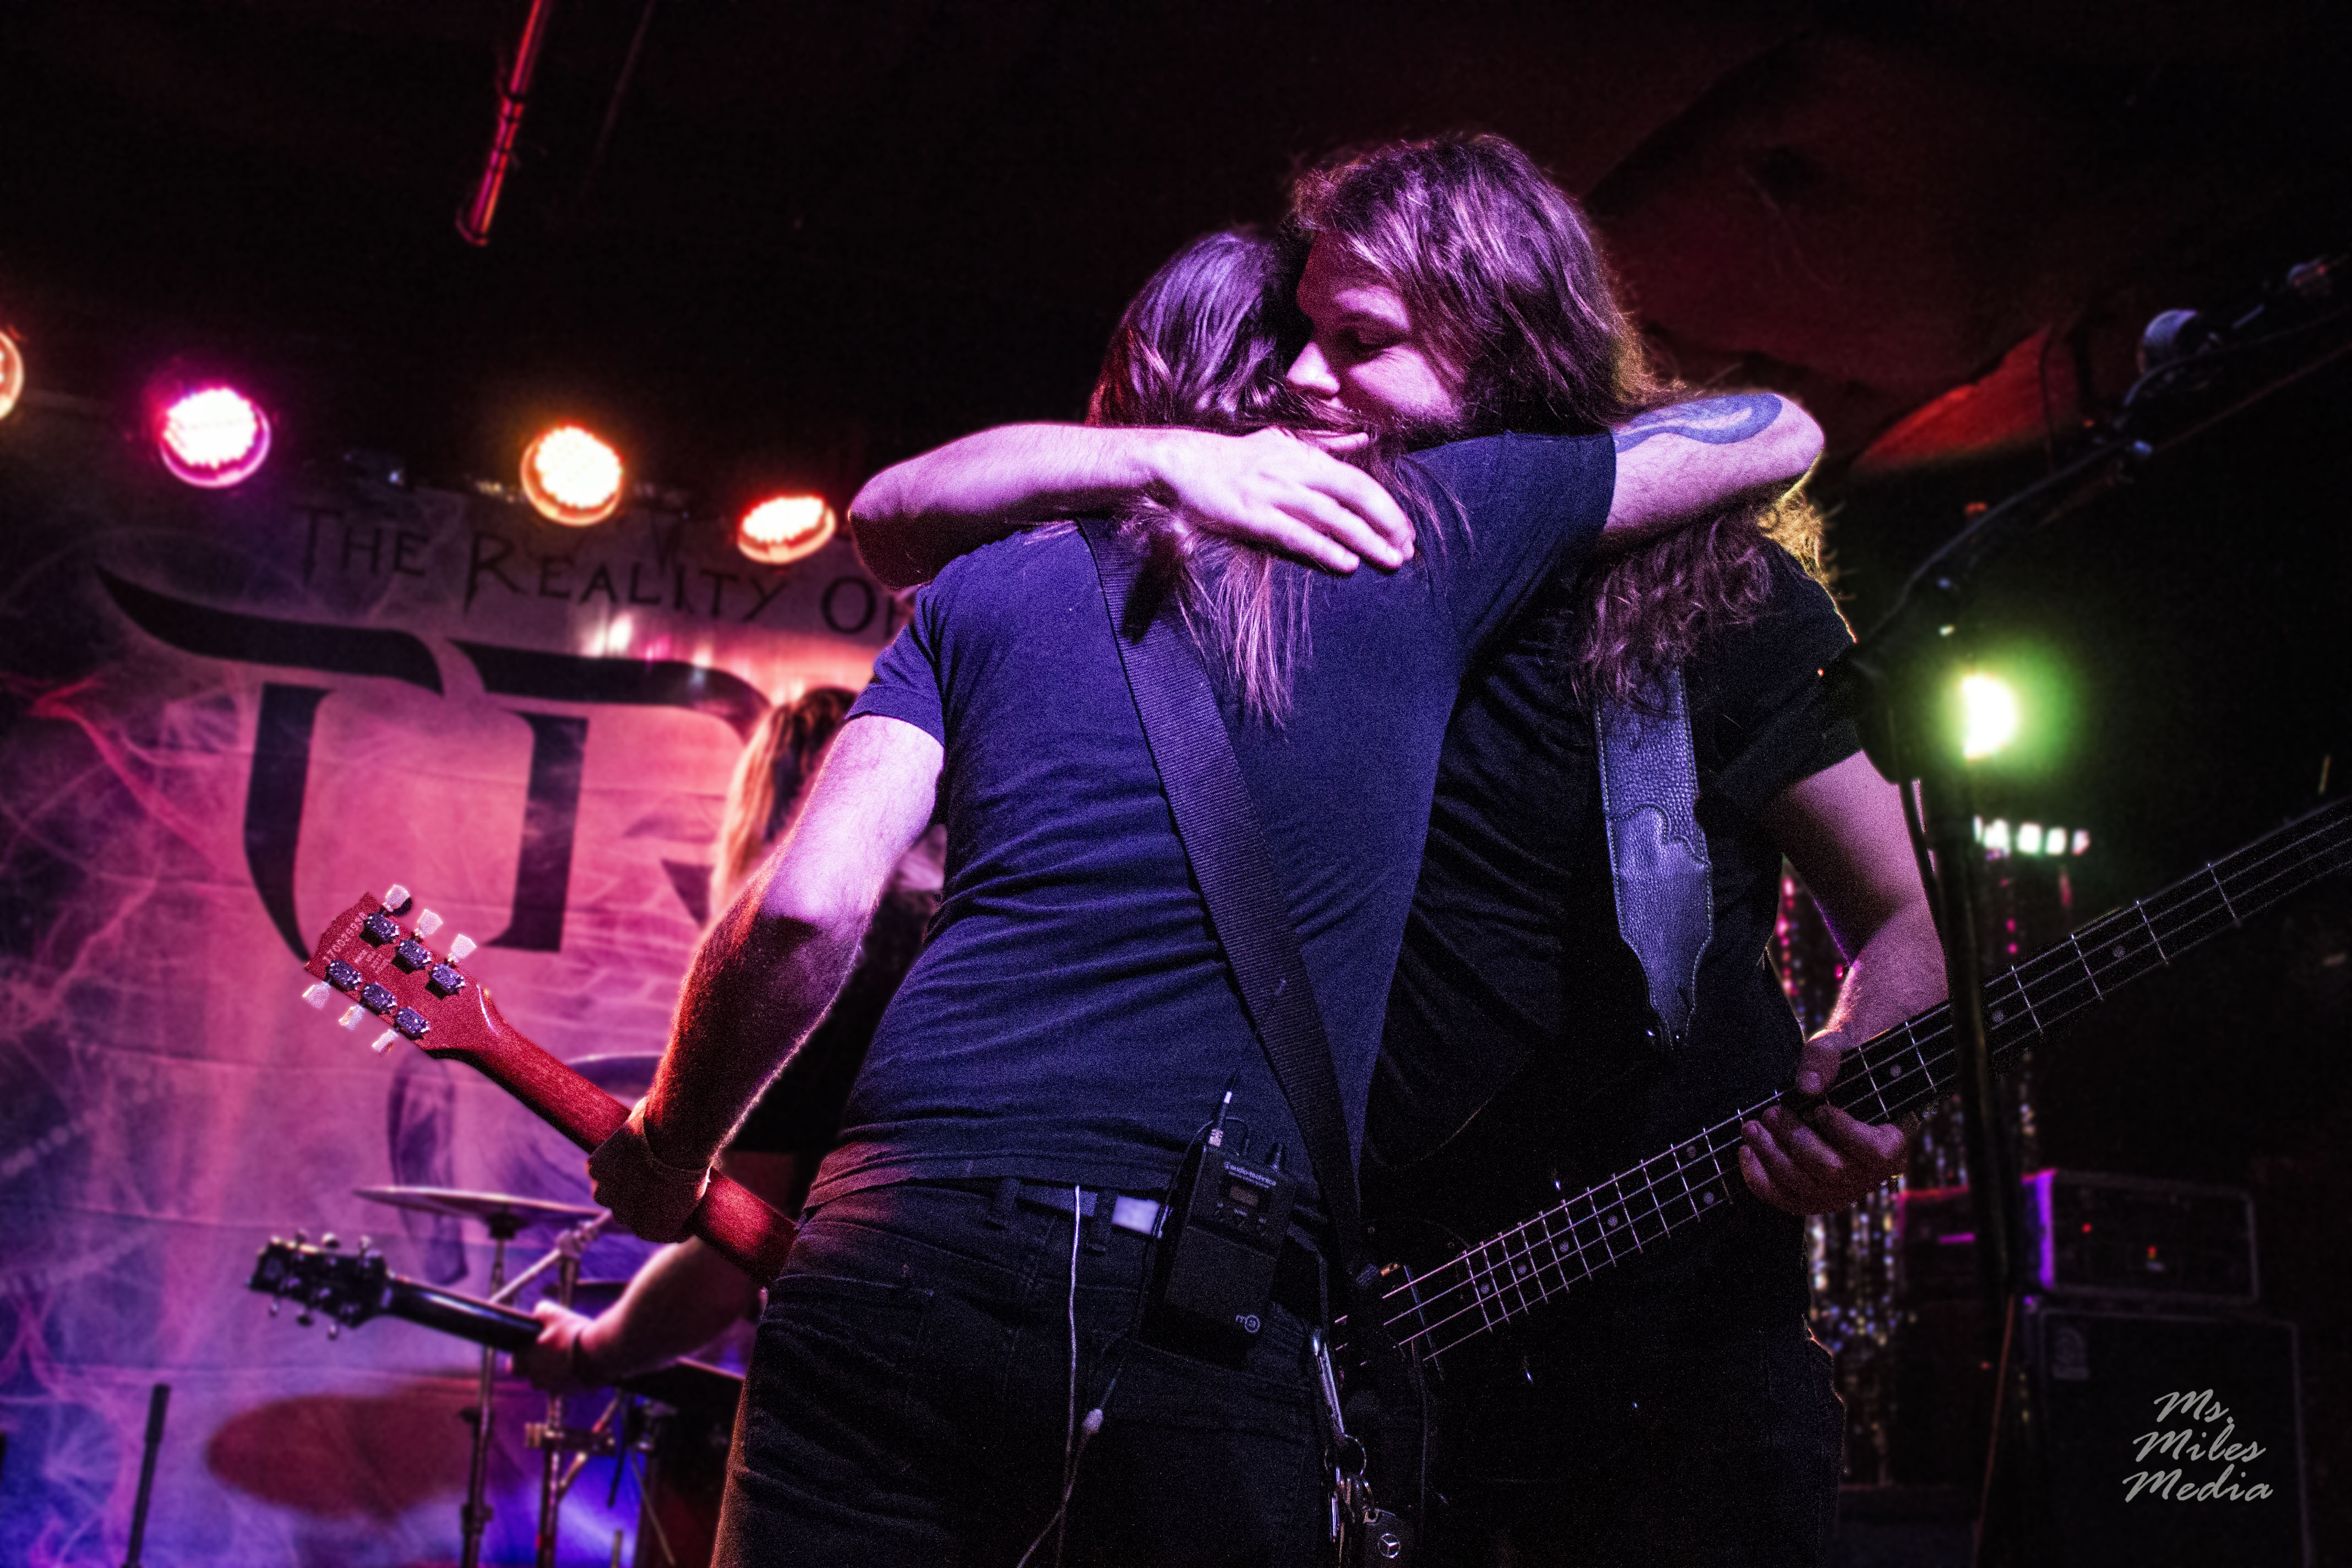 T.R.O.Y bid farewell to bassist with support from Mood Ring Circus, Salt